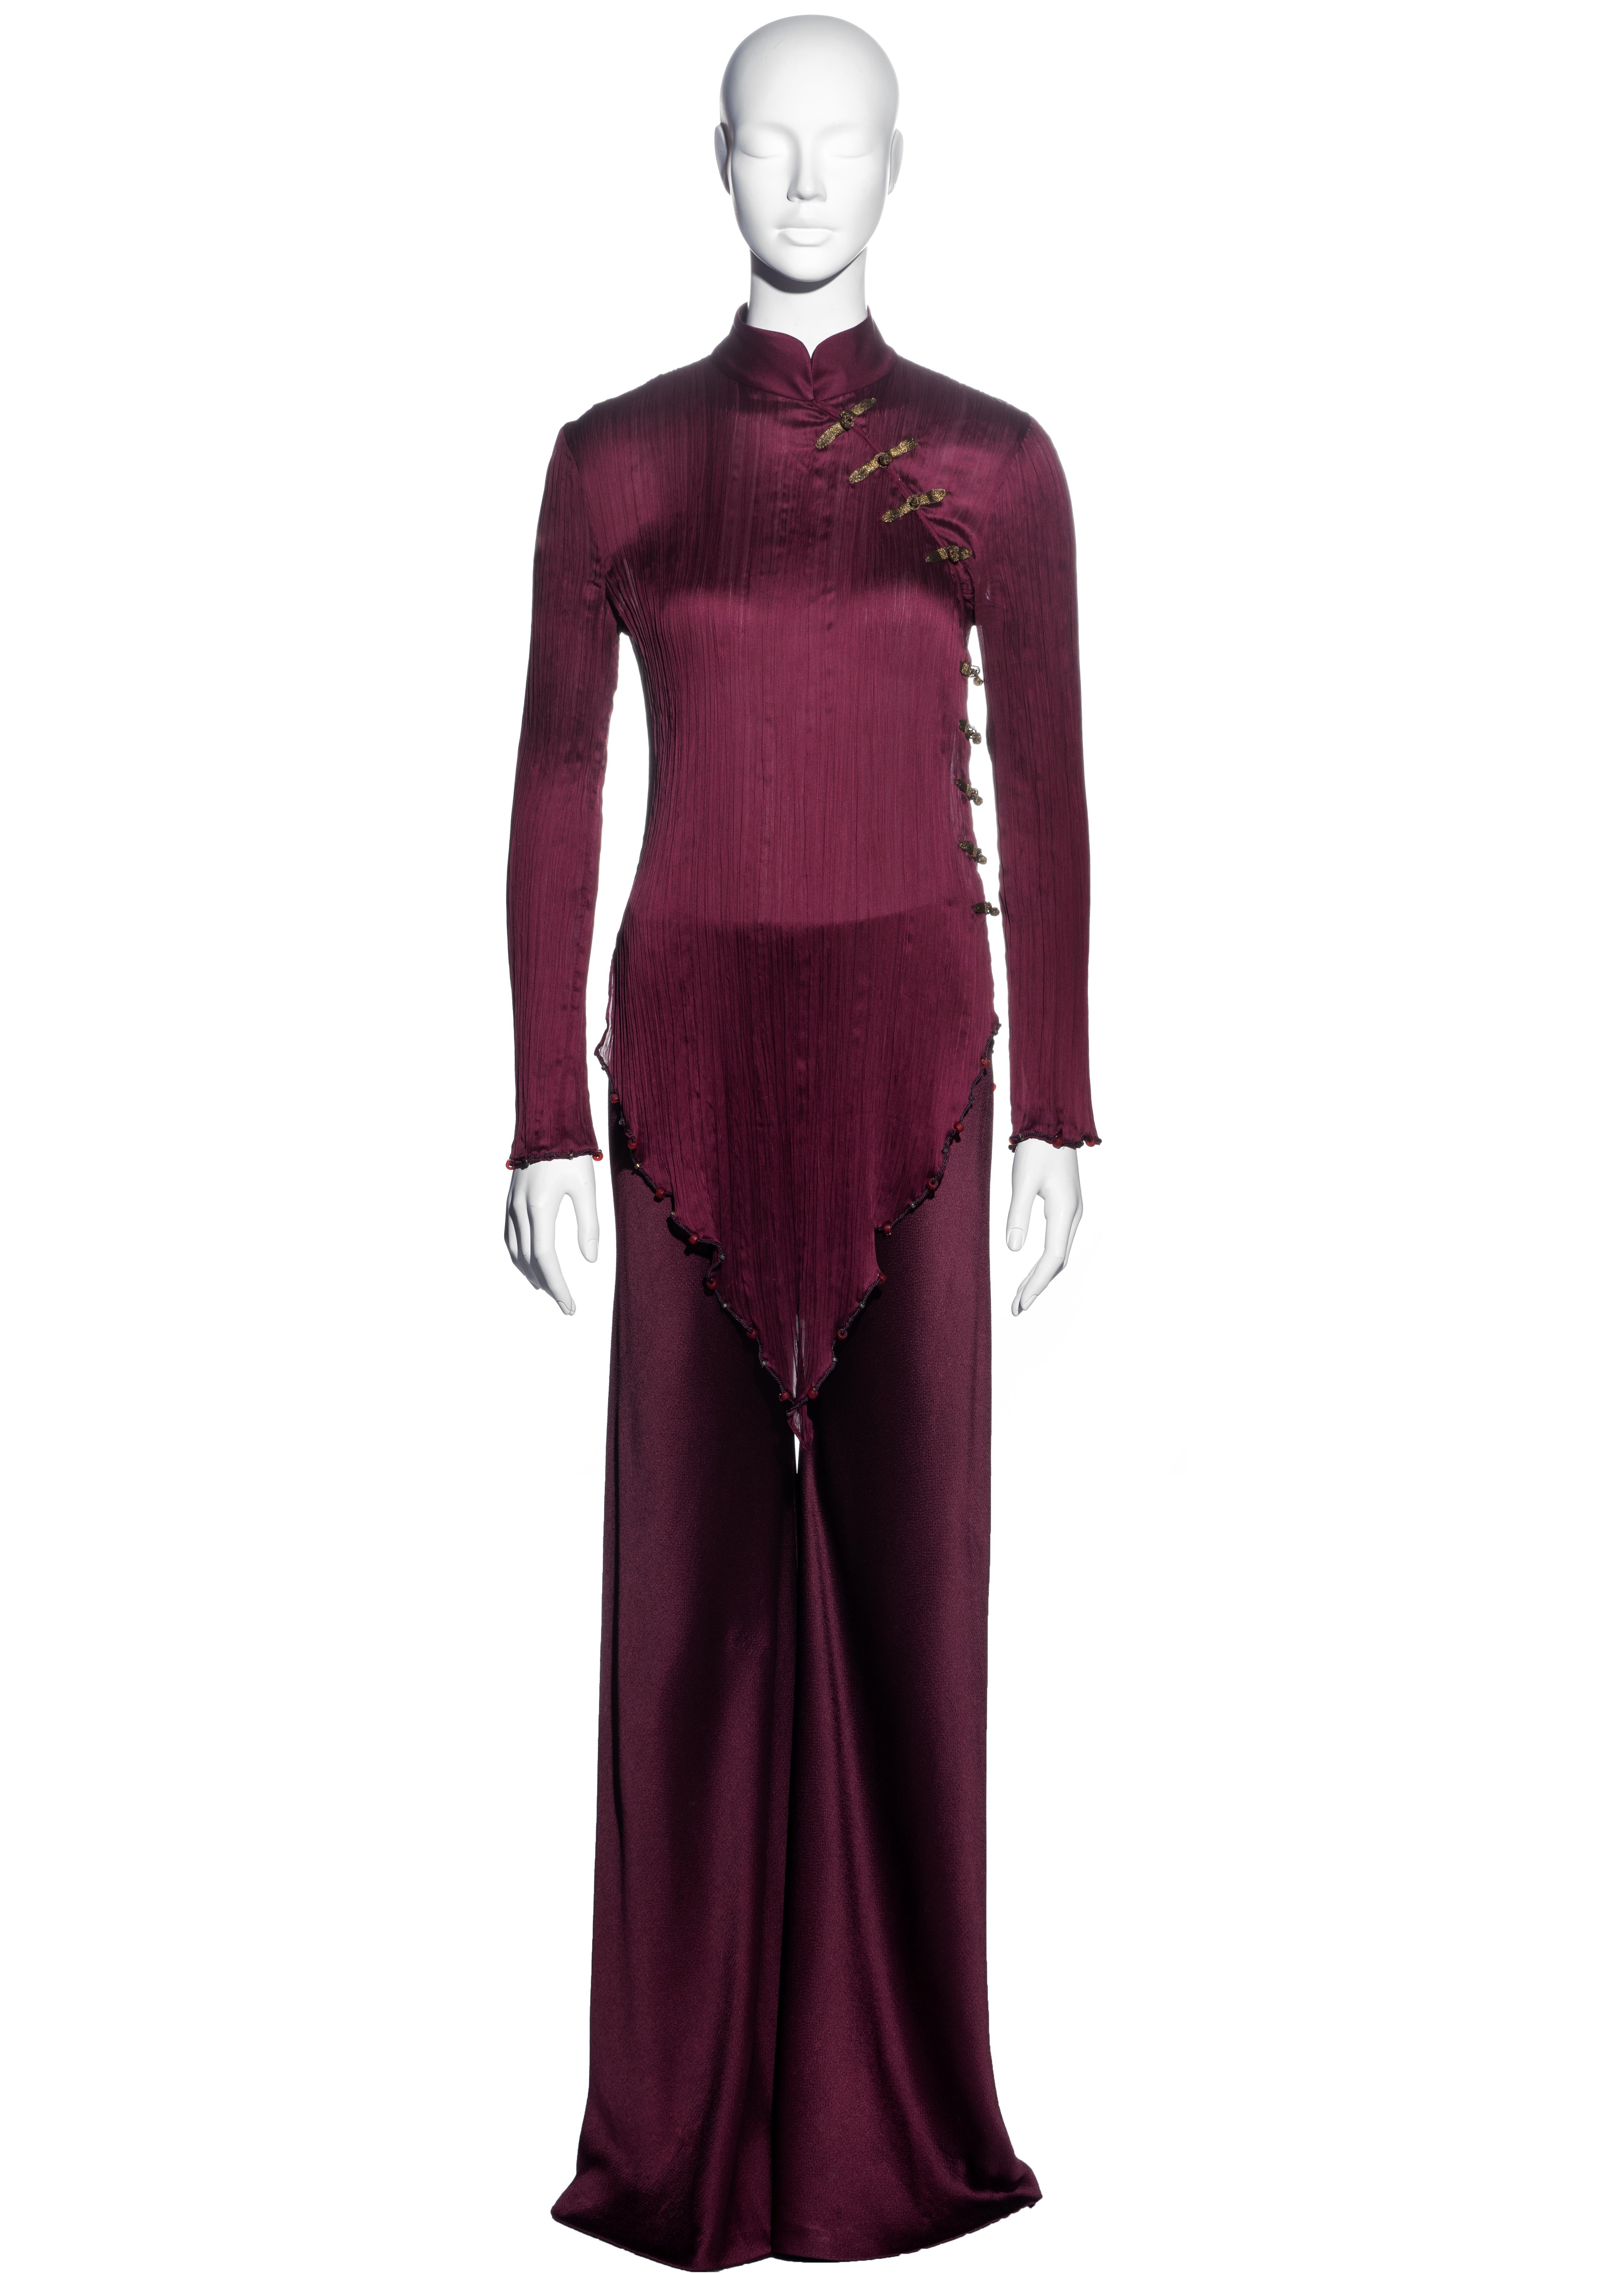 ▪ Christian Dior burgundy pleated pant suit
▪ Designed by John Galliano 
▪ Mandarin collar  
▪ Cheongsam style  
▪ Mariano Fortuny style pleats  
▪ Gold lamé frog fastenings  
▪ Beaded rope trim
▪ Wide leg pants 
▪ Pants: FR 40 - UK 12 - US 8
▪